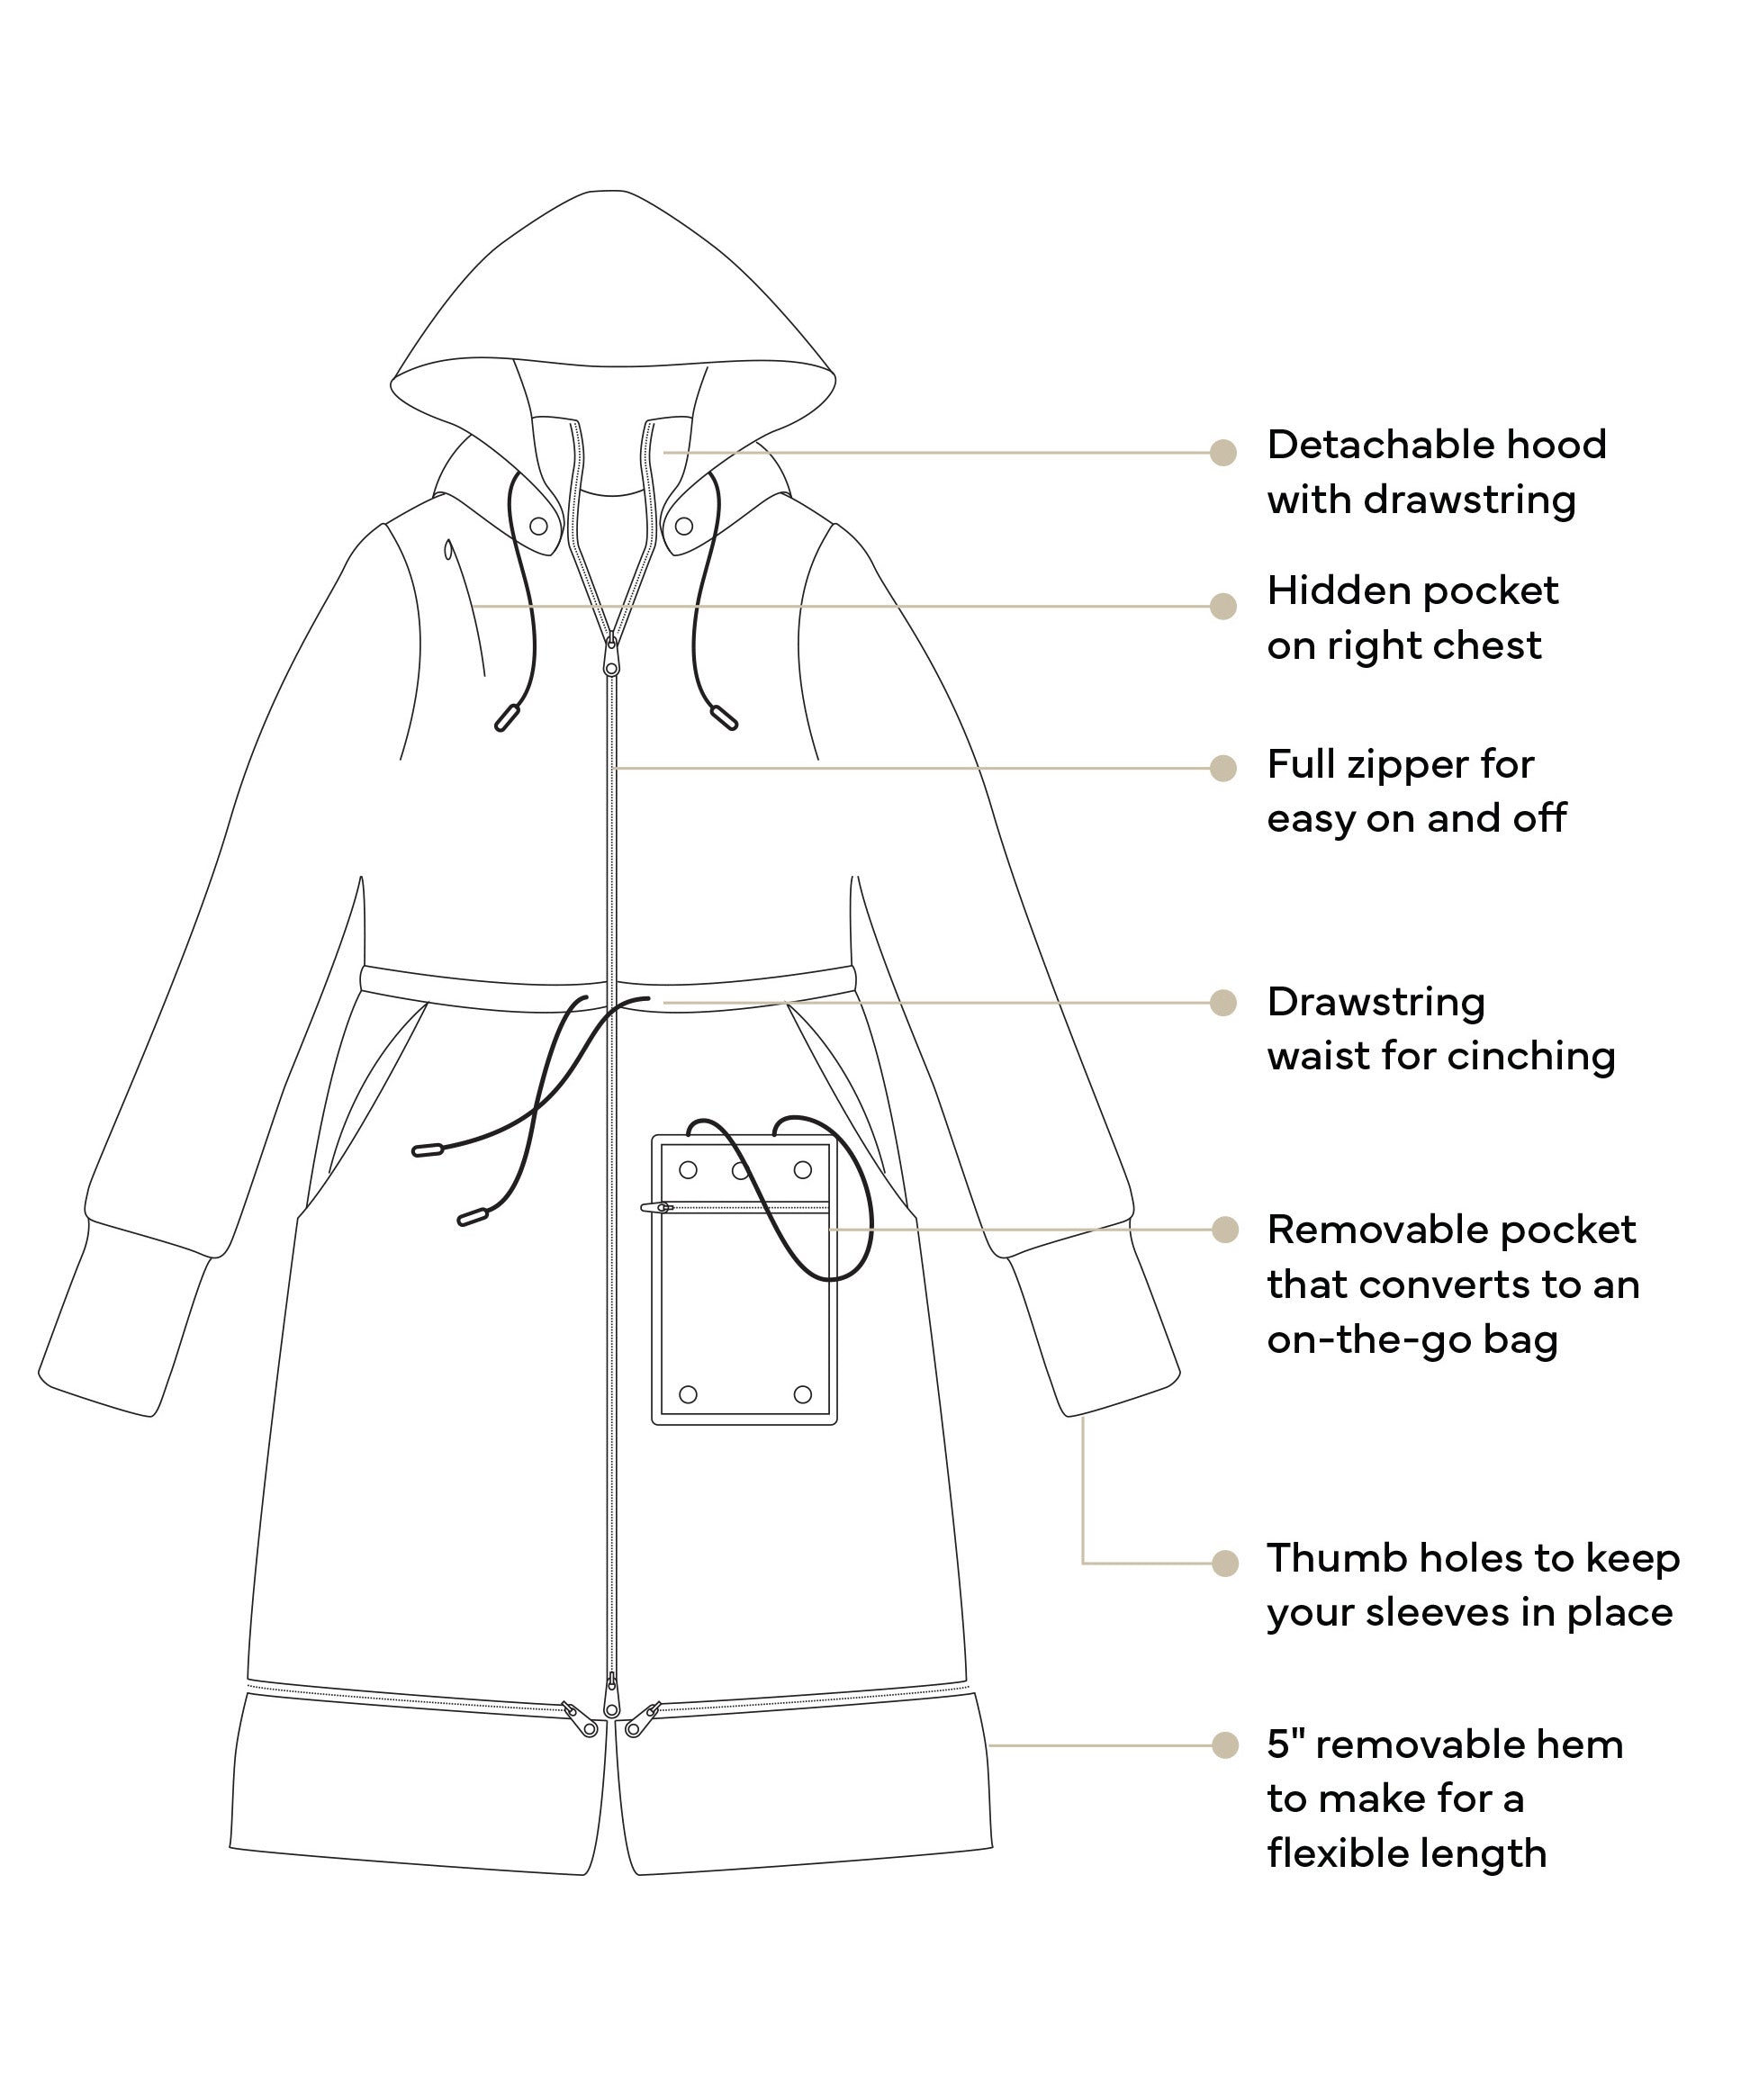 REDISwess functional garment features